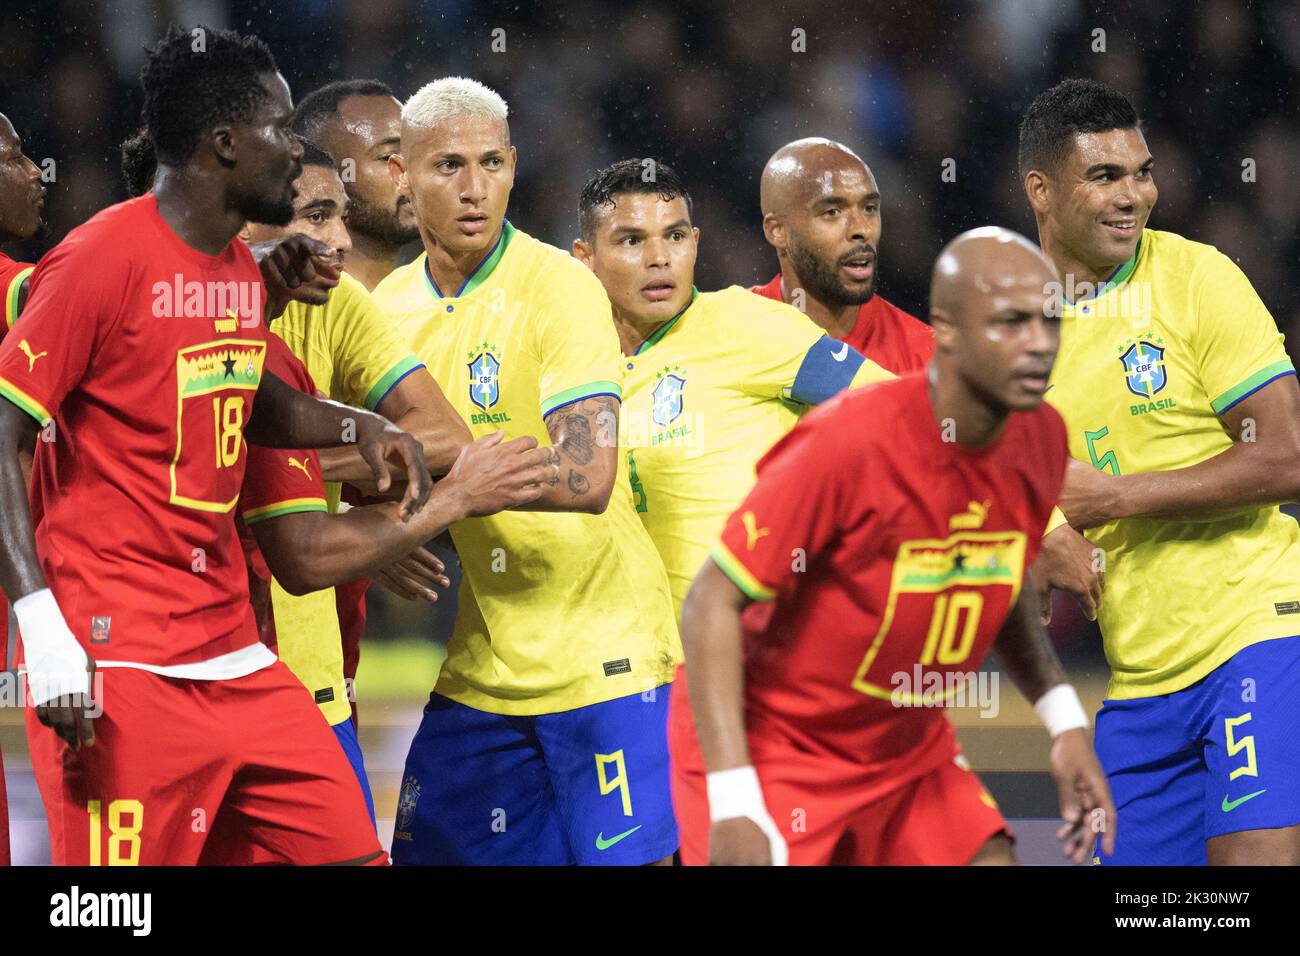 Le Havre, France. 24th Sep, 2022. Richarlison, Thiago Silva and Casemiro of Brazil in action during the International Friendly match between Brazil and Ghana at Stade Oceane, on September 23, 2022 in Le Havre, France. Photo by David Niviere/ABACAPRESS.COM Credit: Abaca Press/Alamy Live News Stock Photo